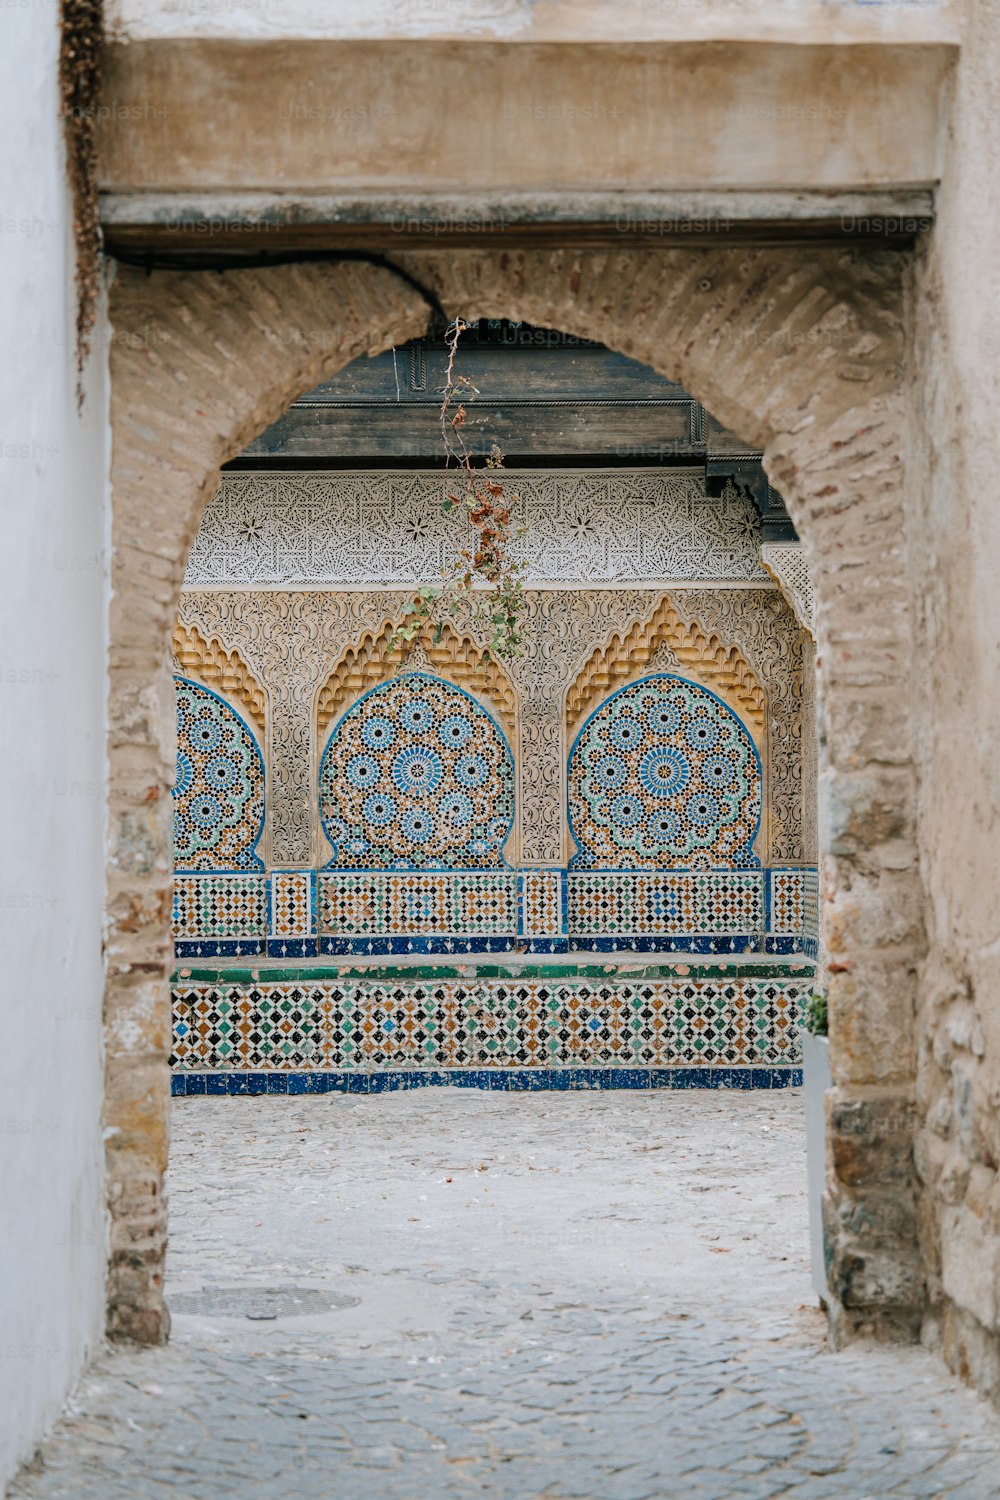 an archway in a building with a decorative tile design